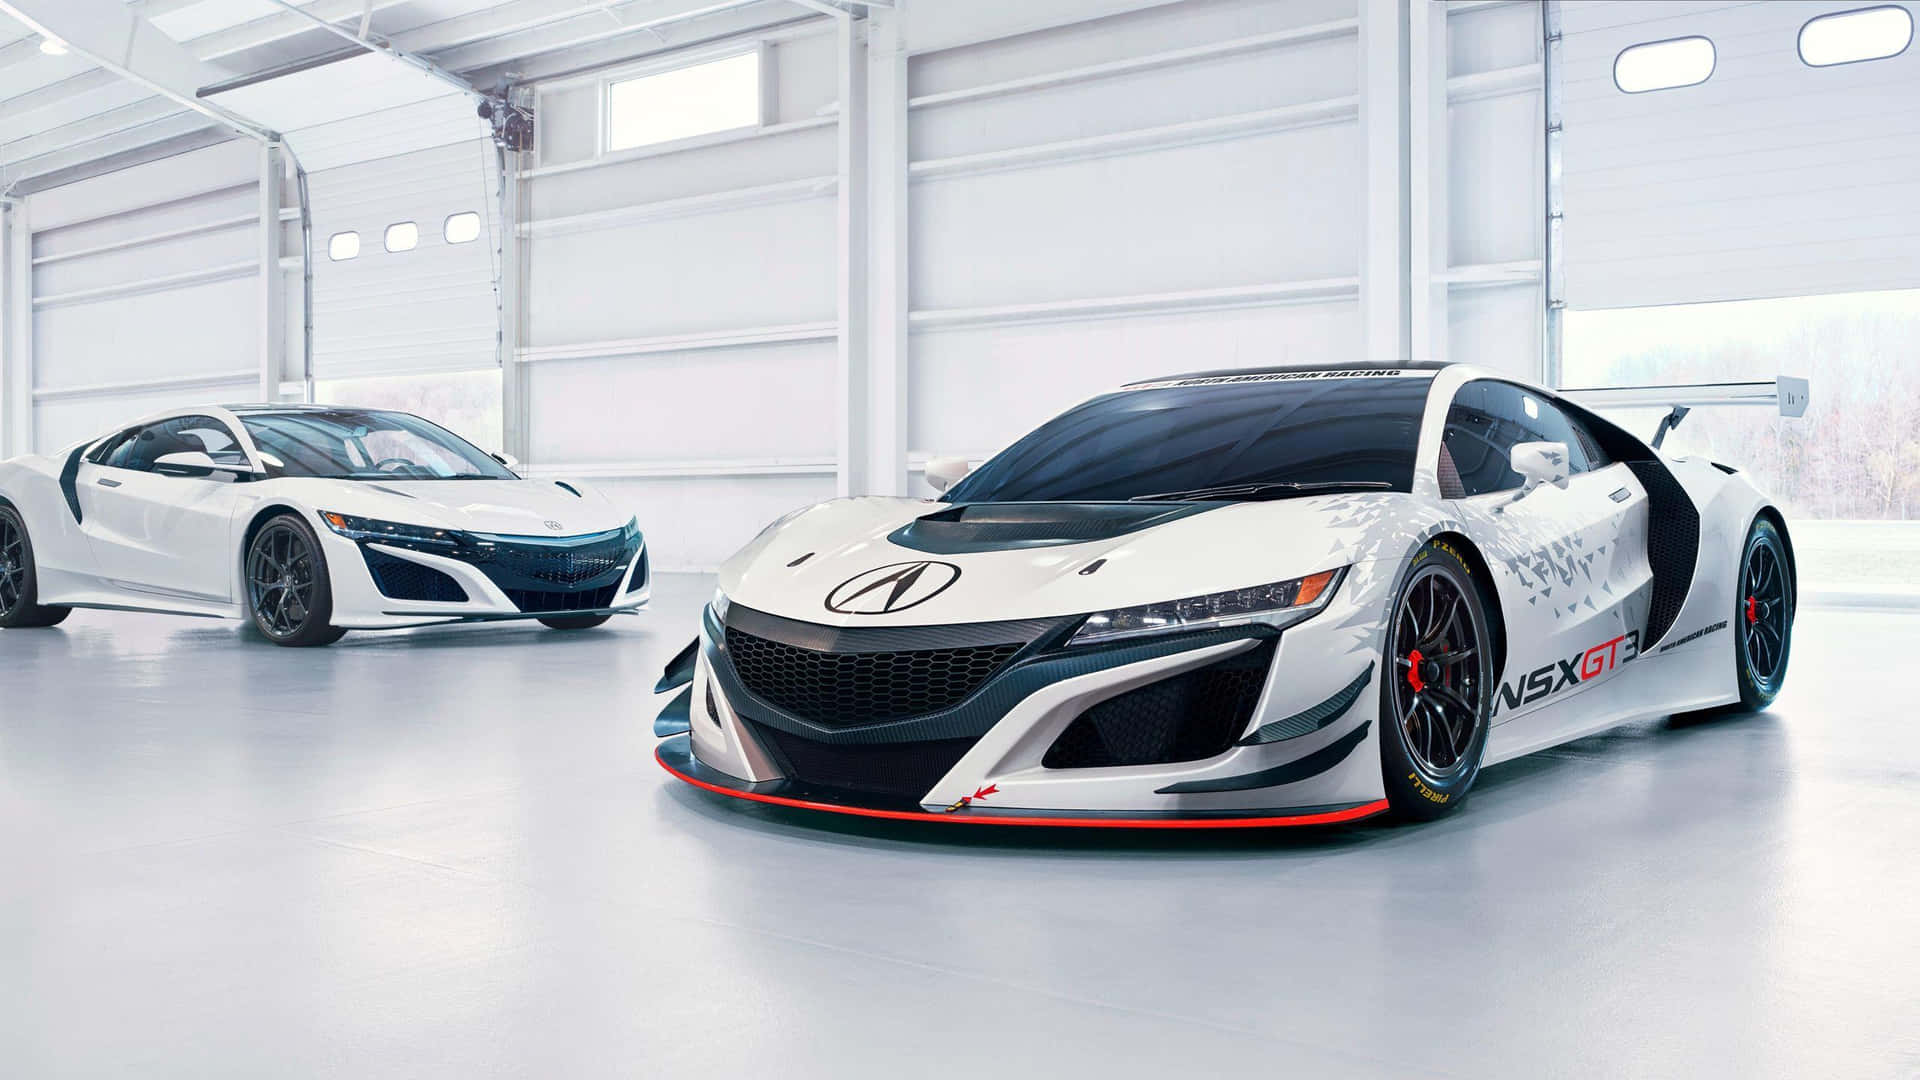 A Stunning Acura NSX in Full Glory Wallpaper